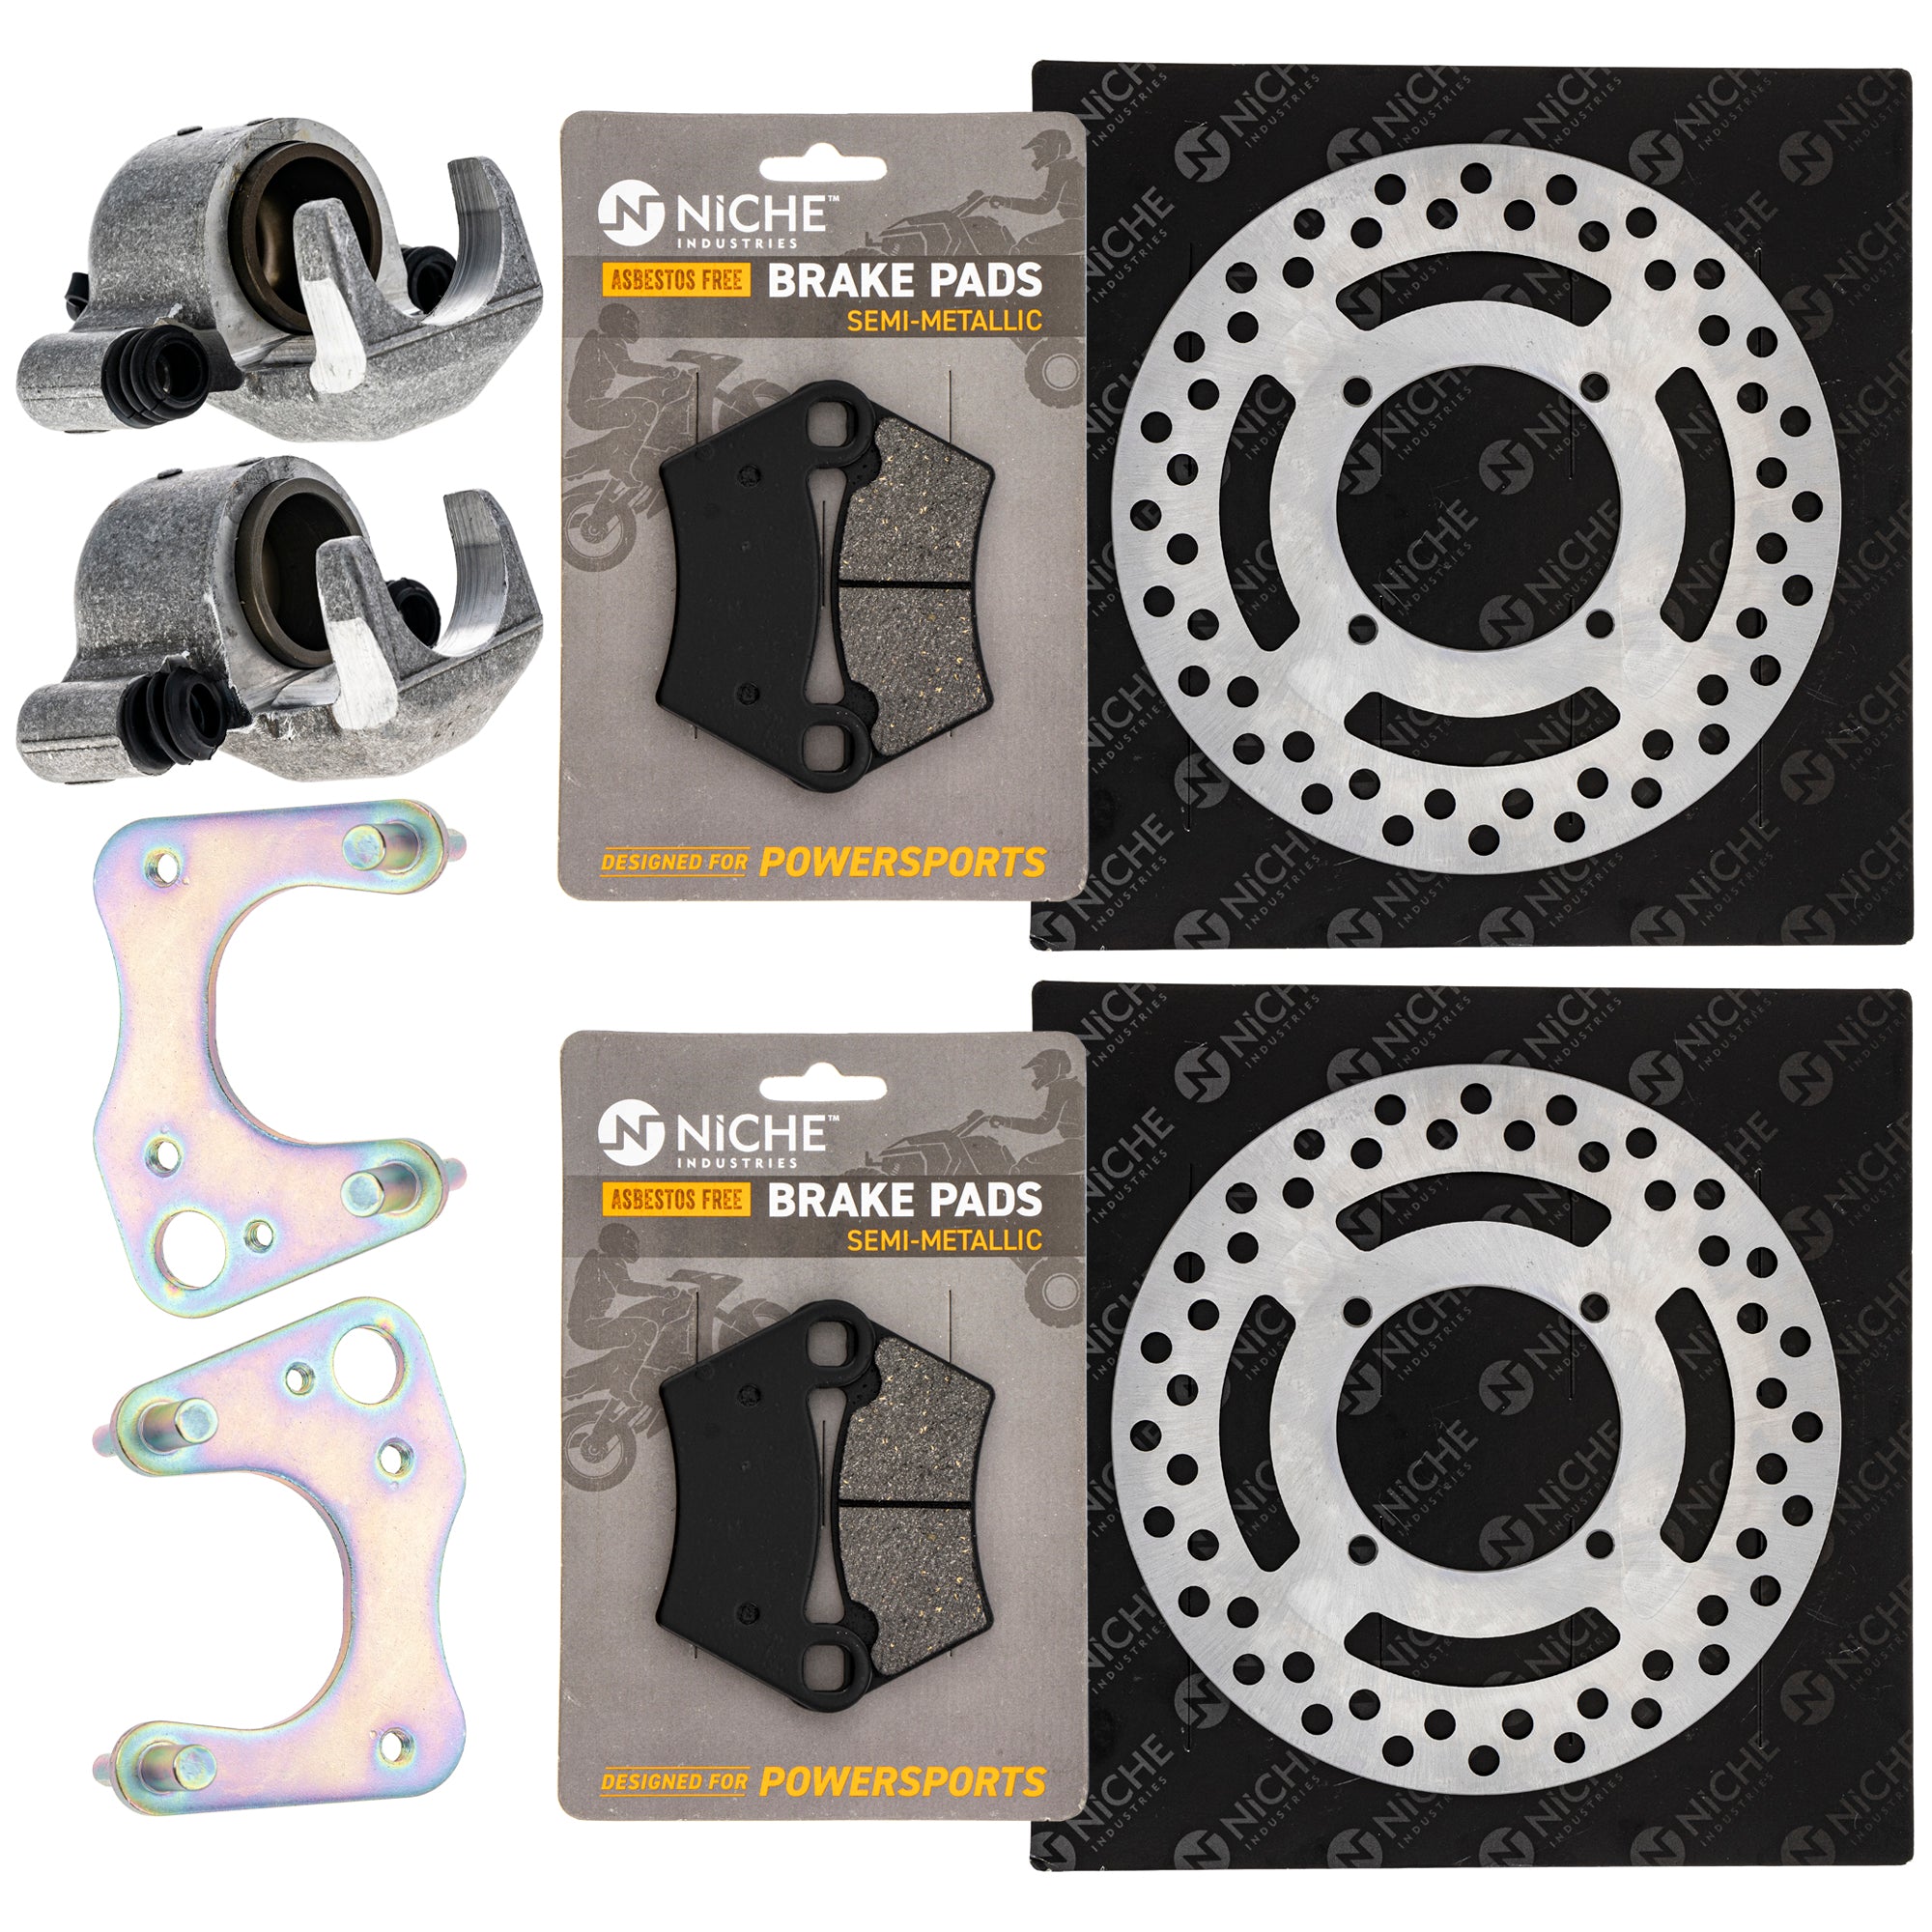 Front Brakes Rebuild Kit - Calipers, Rotors, Pads for zOTHER Polaris GEM Ranger PPS NICHE MK1007958